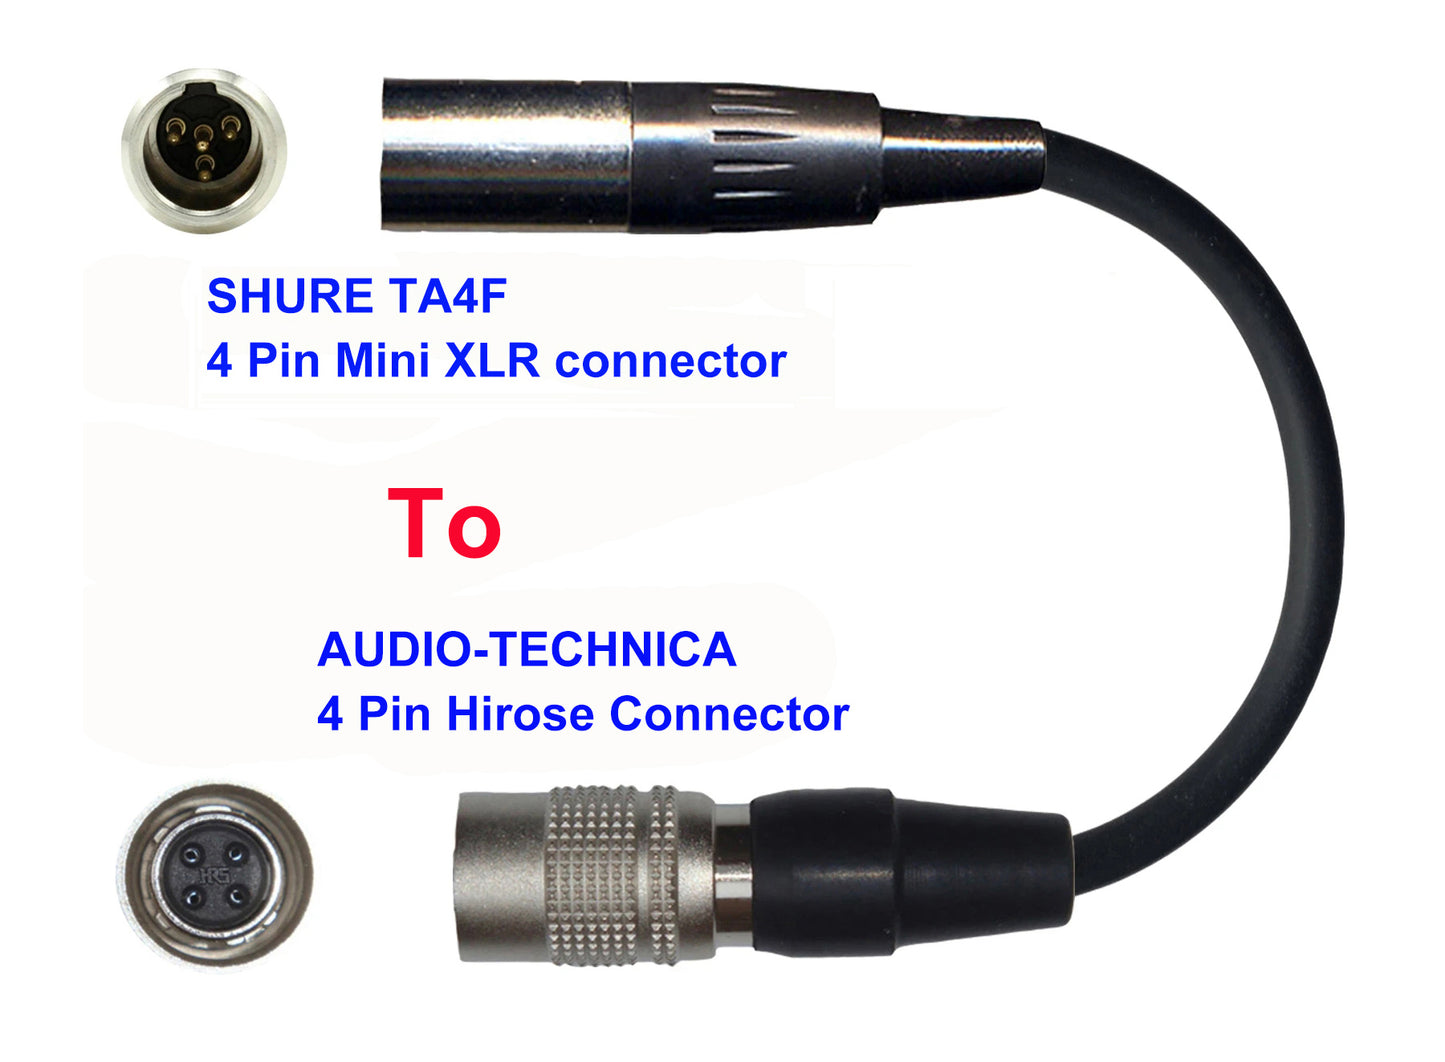 Microphone Adapter - Shure Microphones with TA4F 4 pin mini XLR connector TO Audio-Technica Transmitters with Hirose 4 Pin TA4M connector